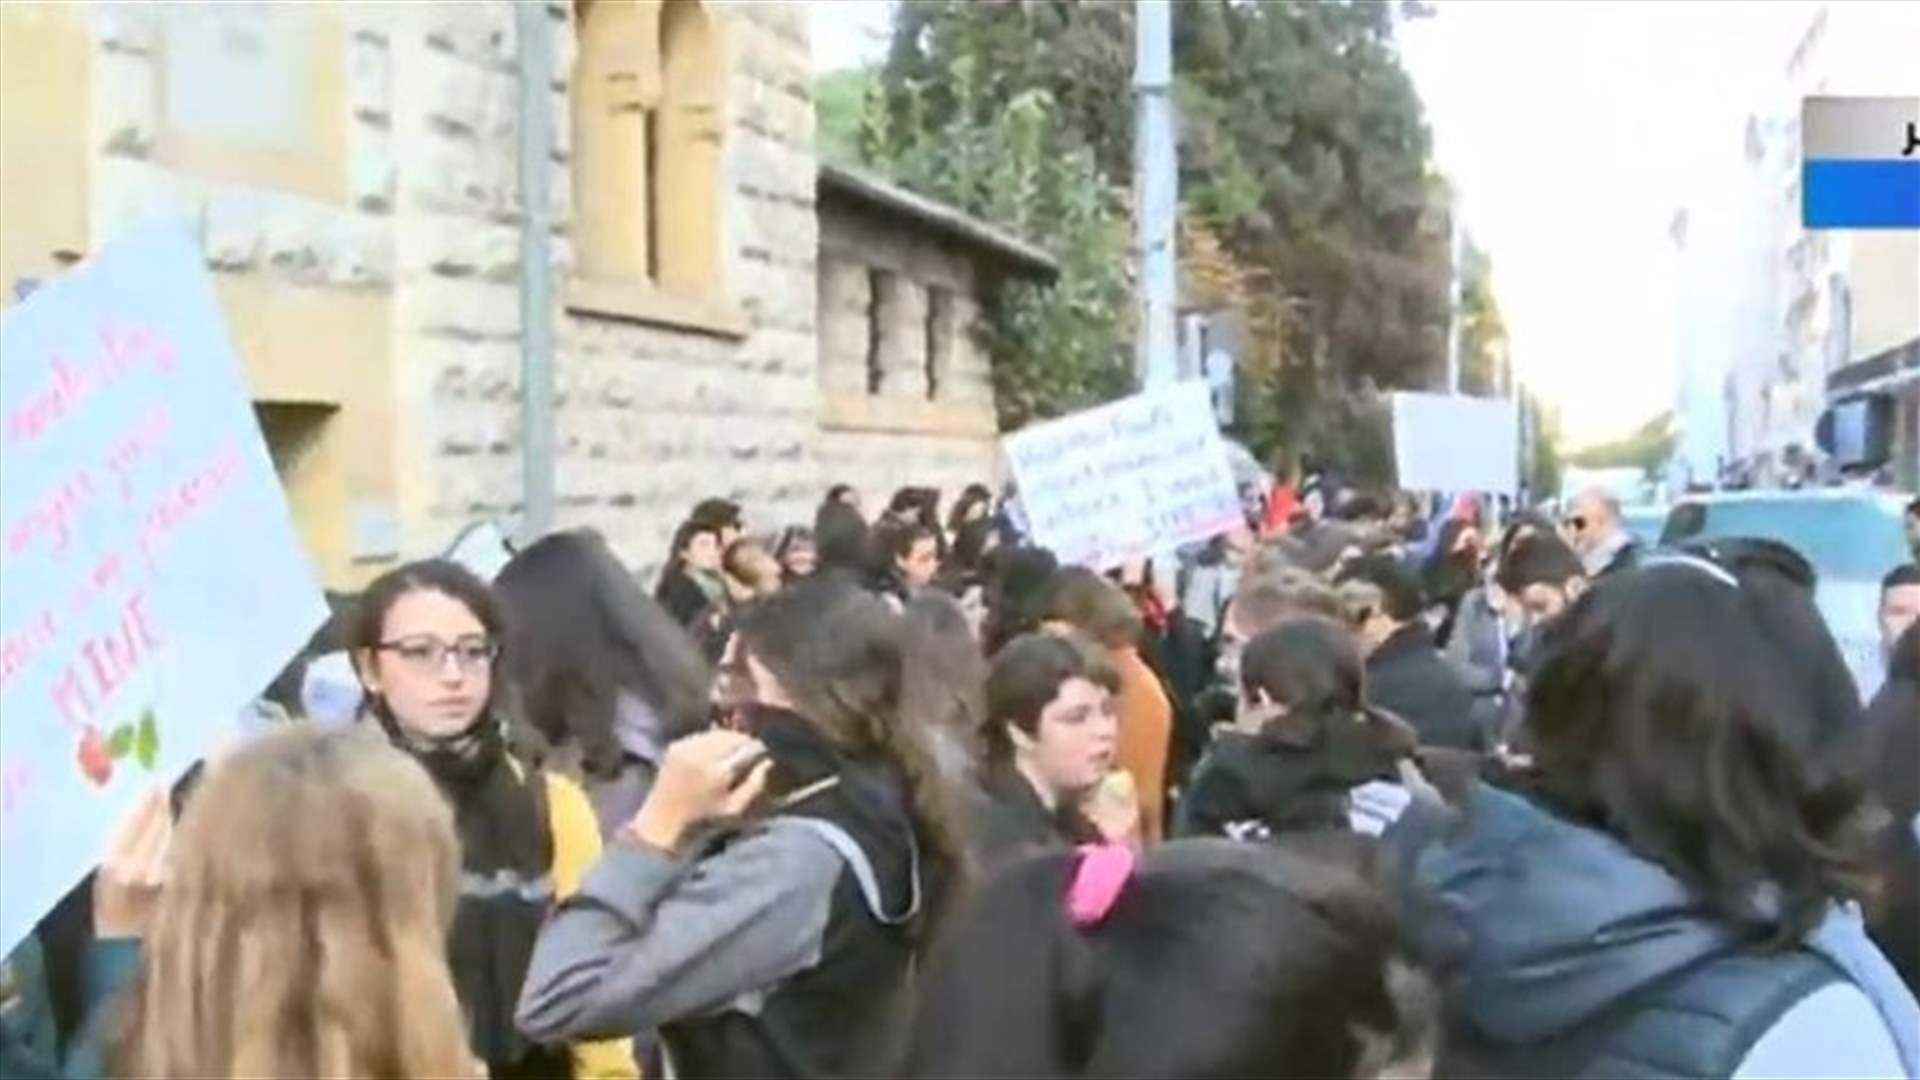 Silent rally staged from Hamra to Martyrs Square in solidarity with sexual harassment survivors (Video)